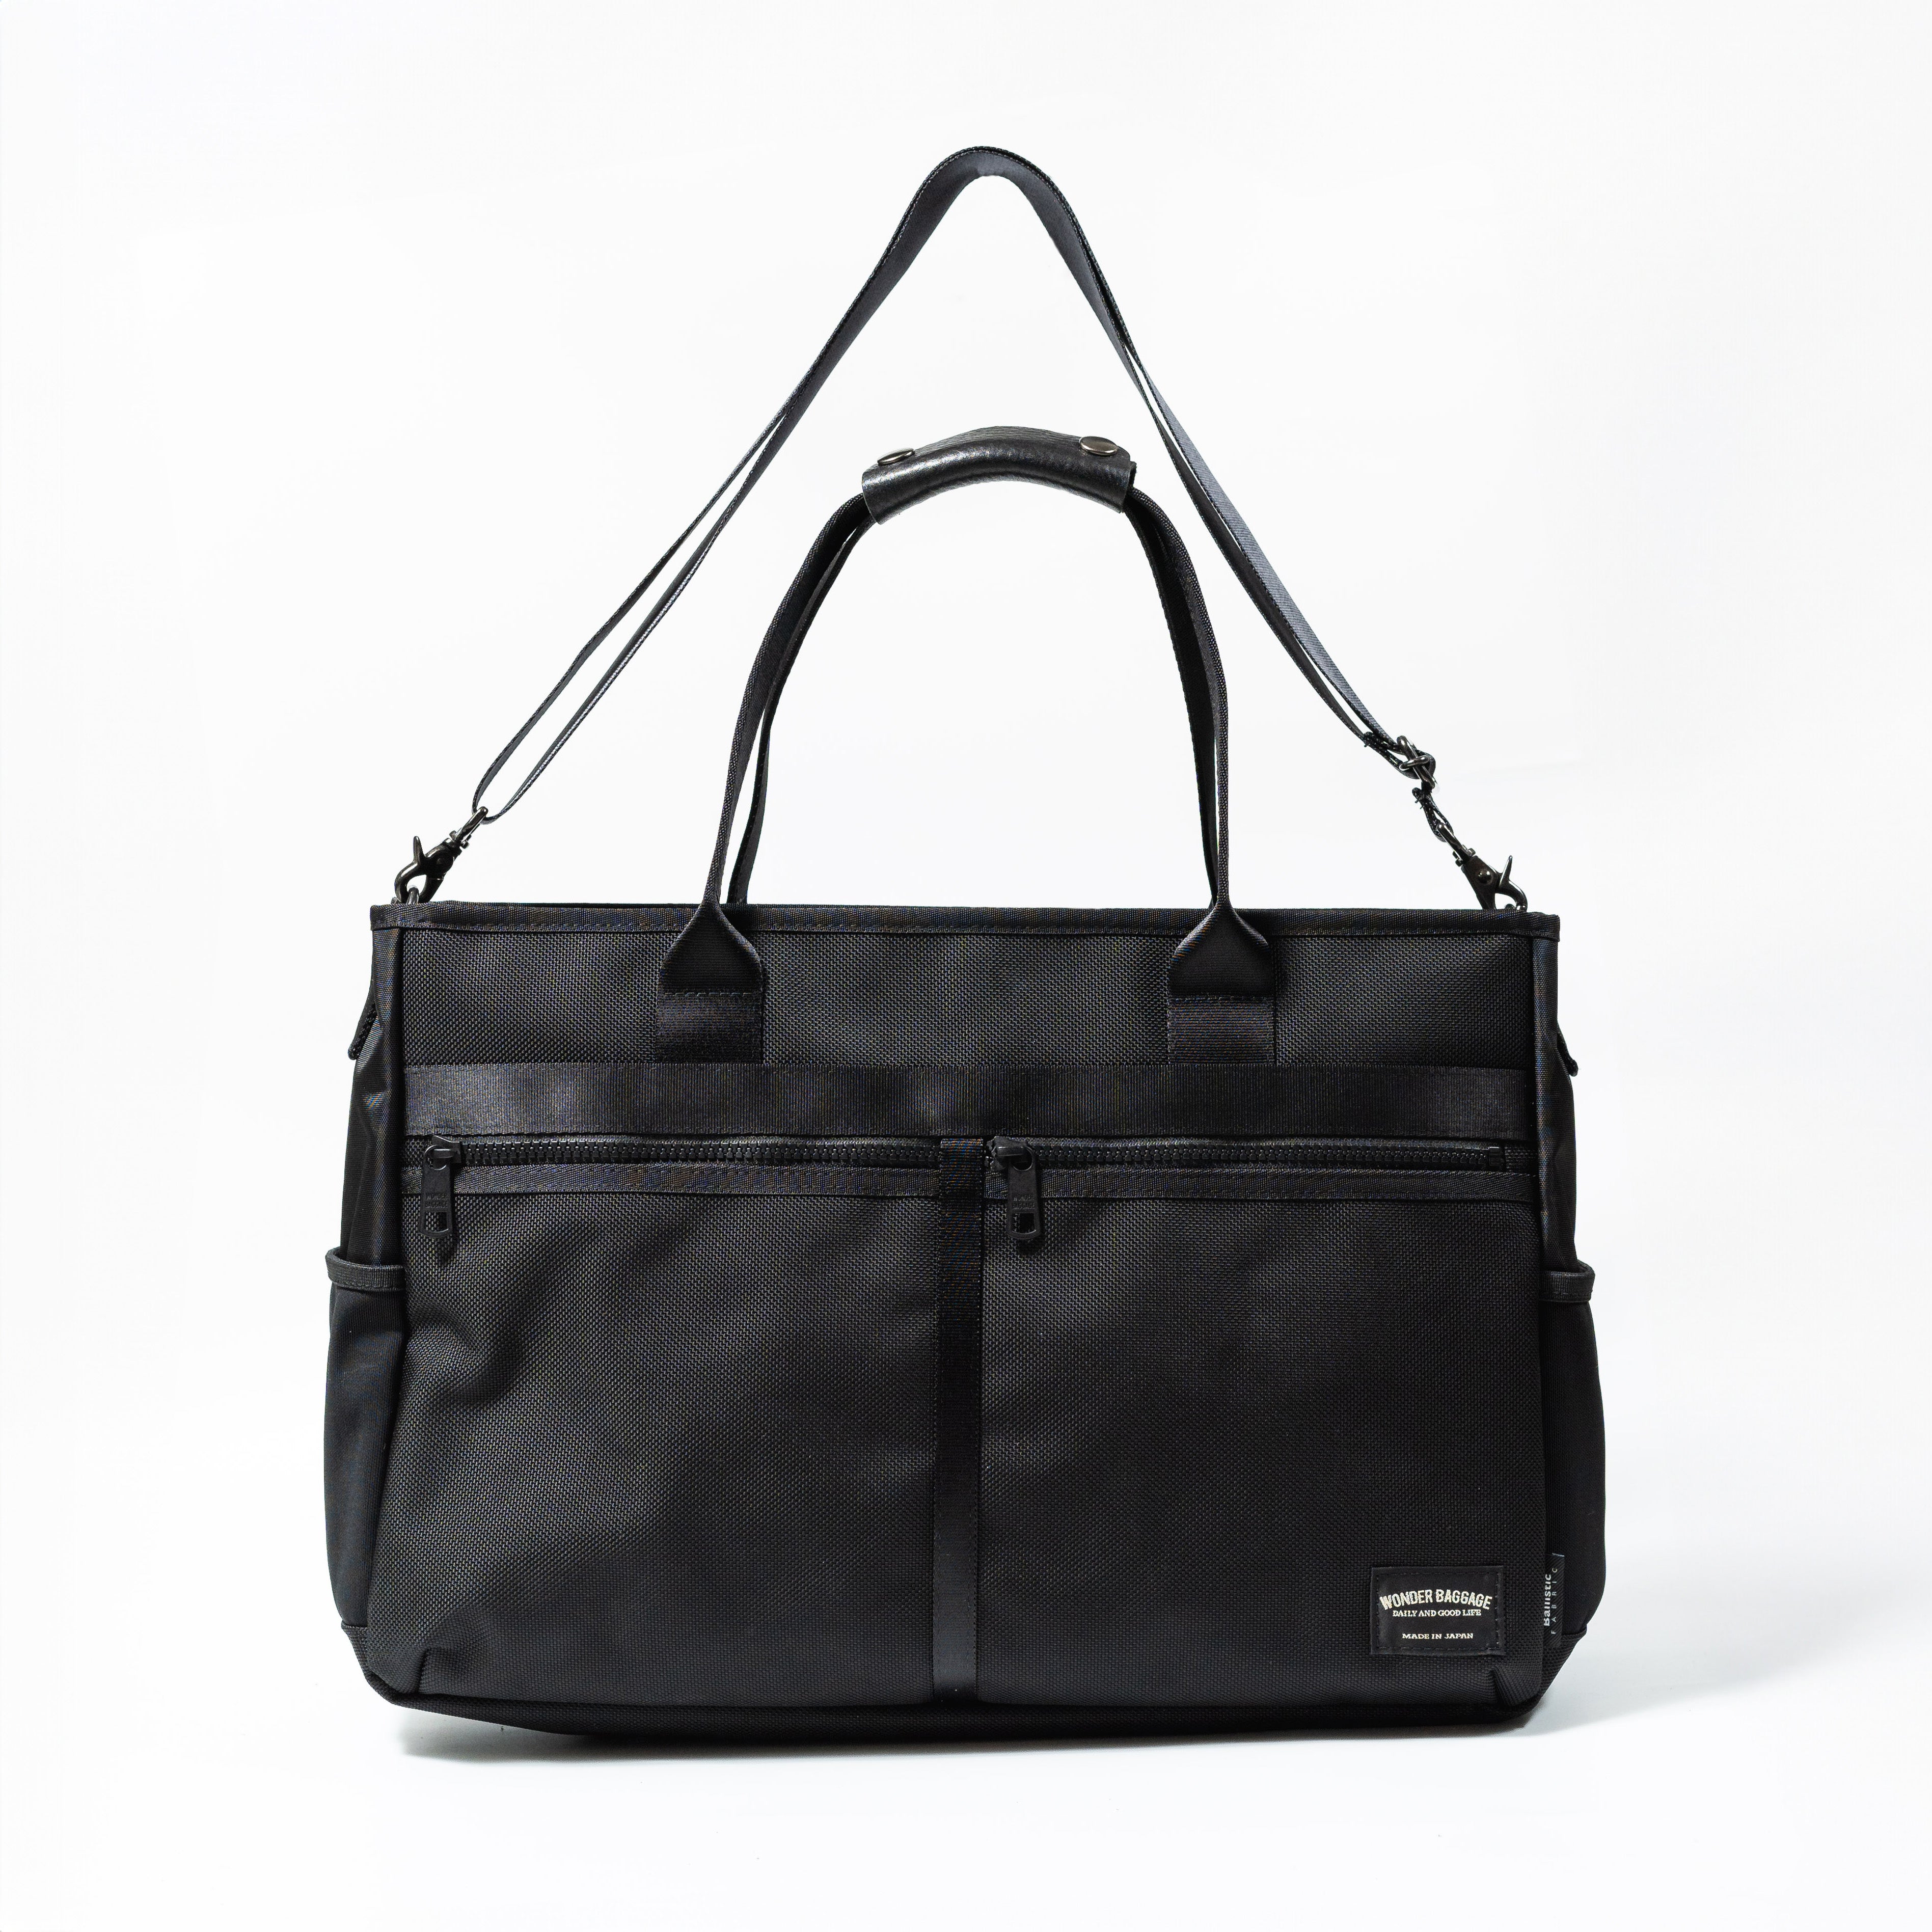 WONDER BAGGAGE-ワンダーバゲージ-ACTIVATE TOTE バリスティック ...